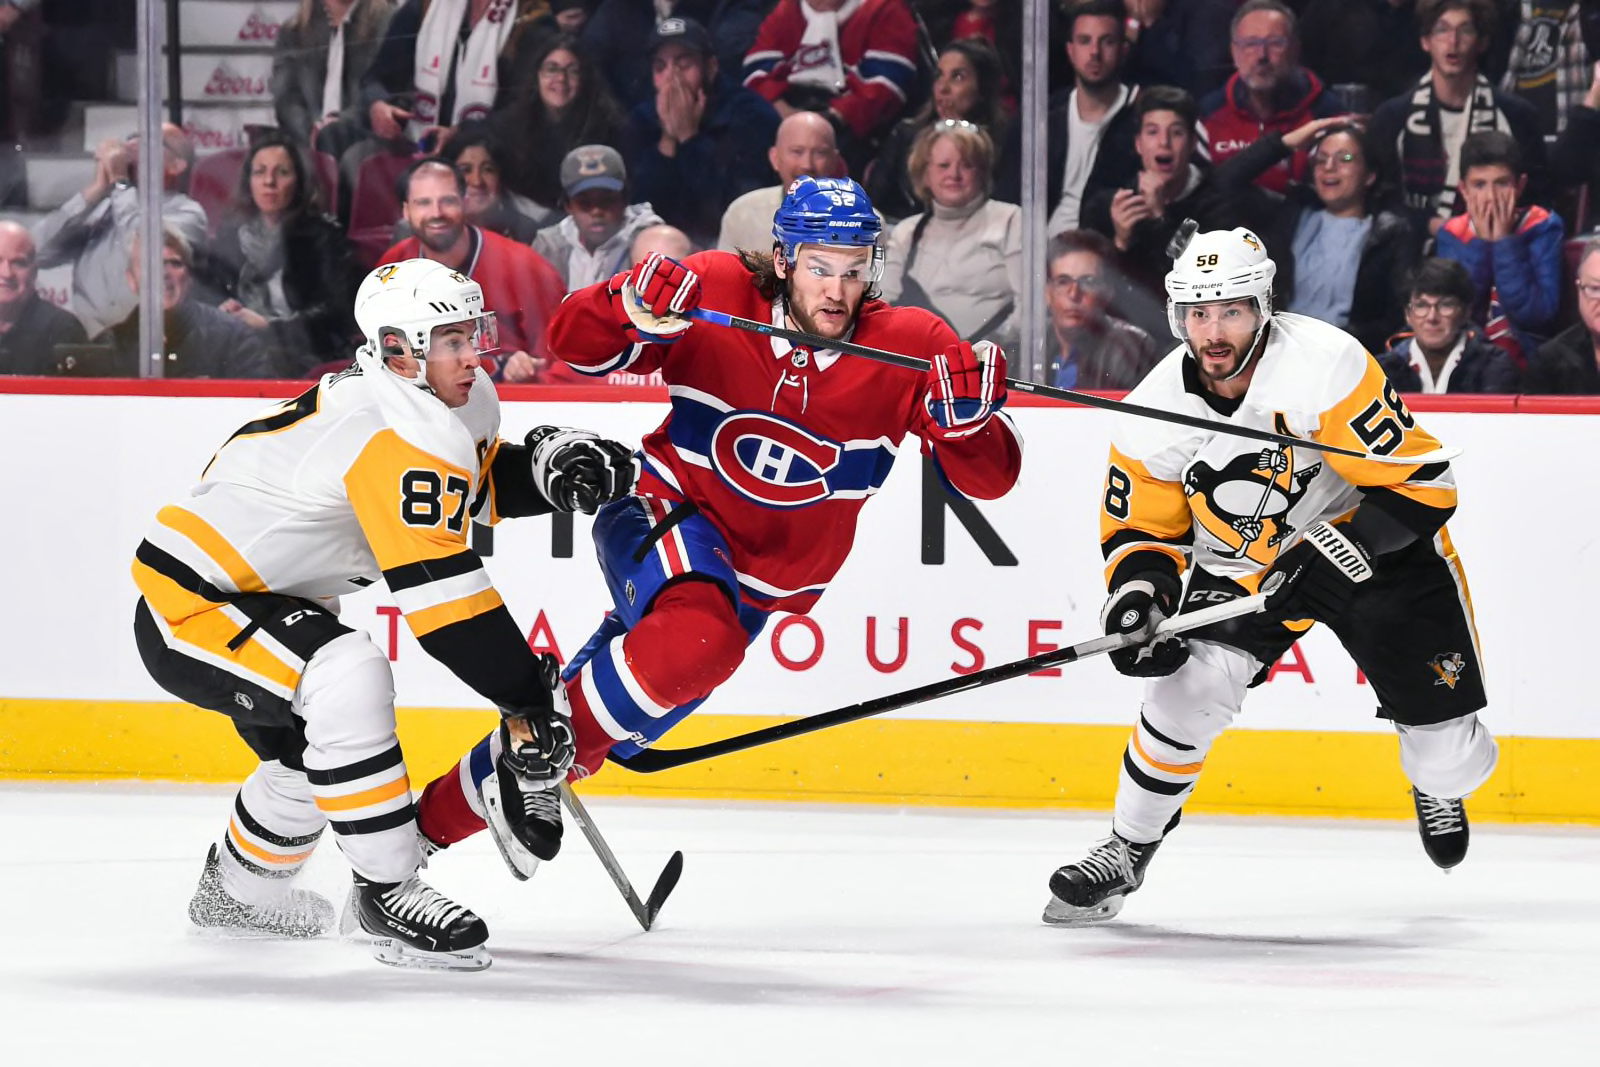 The Montreal Canadiens are heading into 